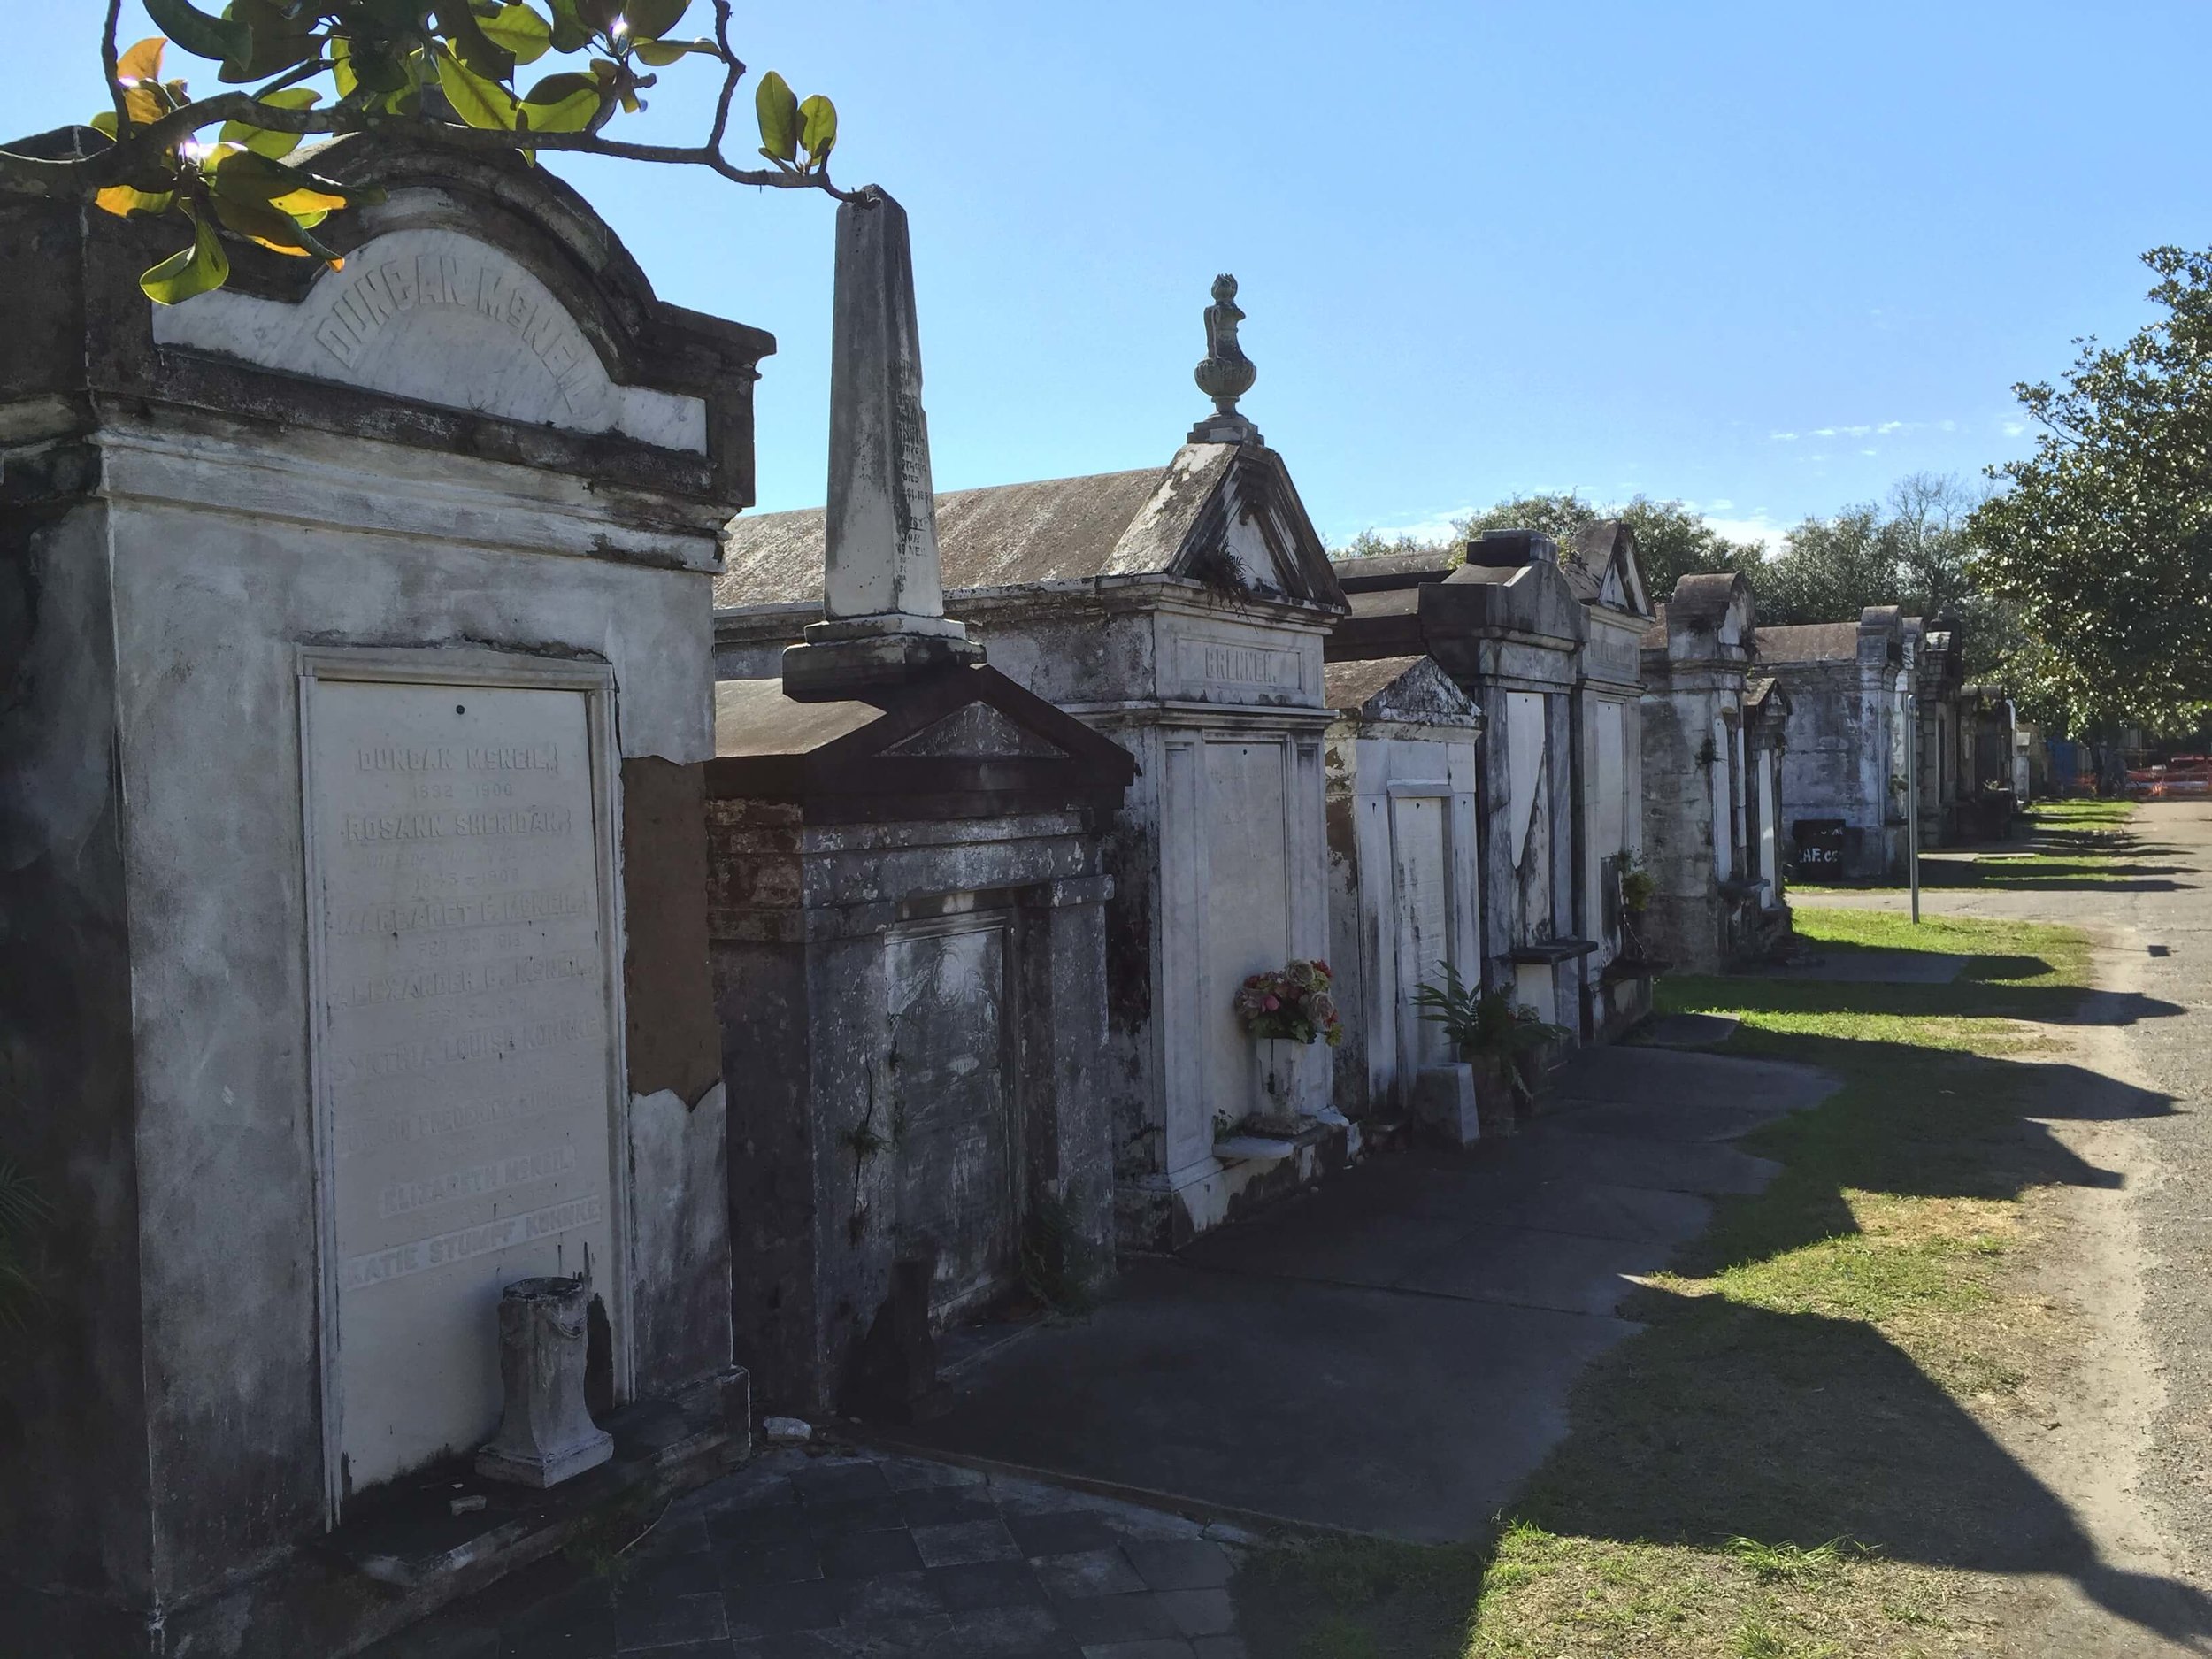 Lafayette Cemetery #1 in New Orleans